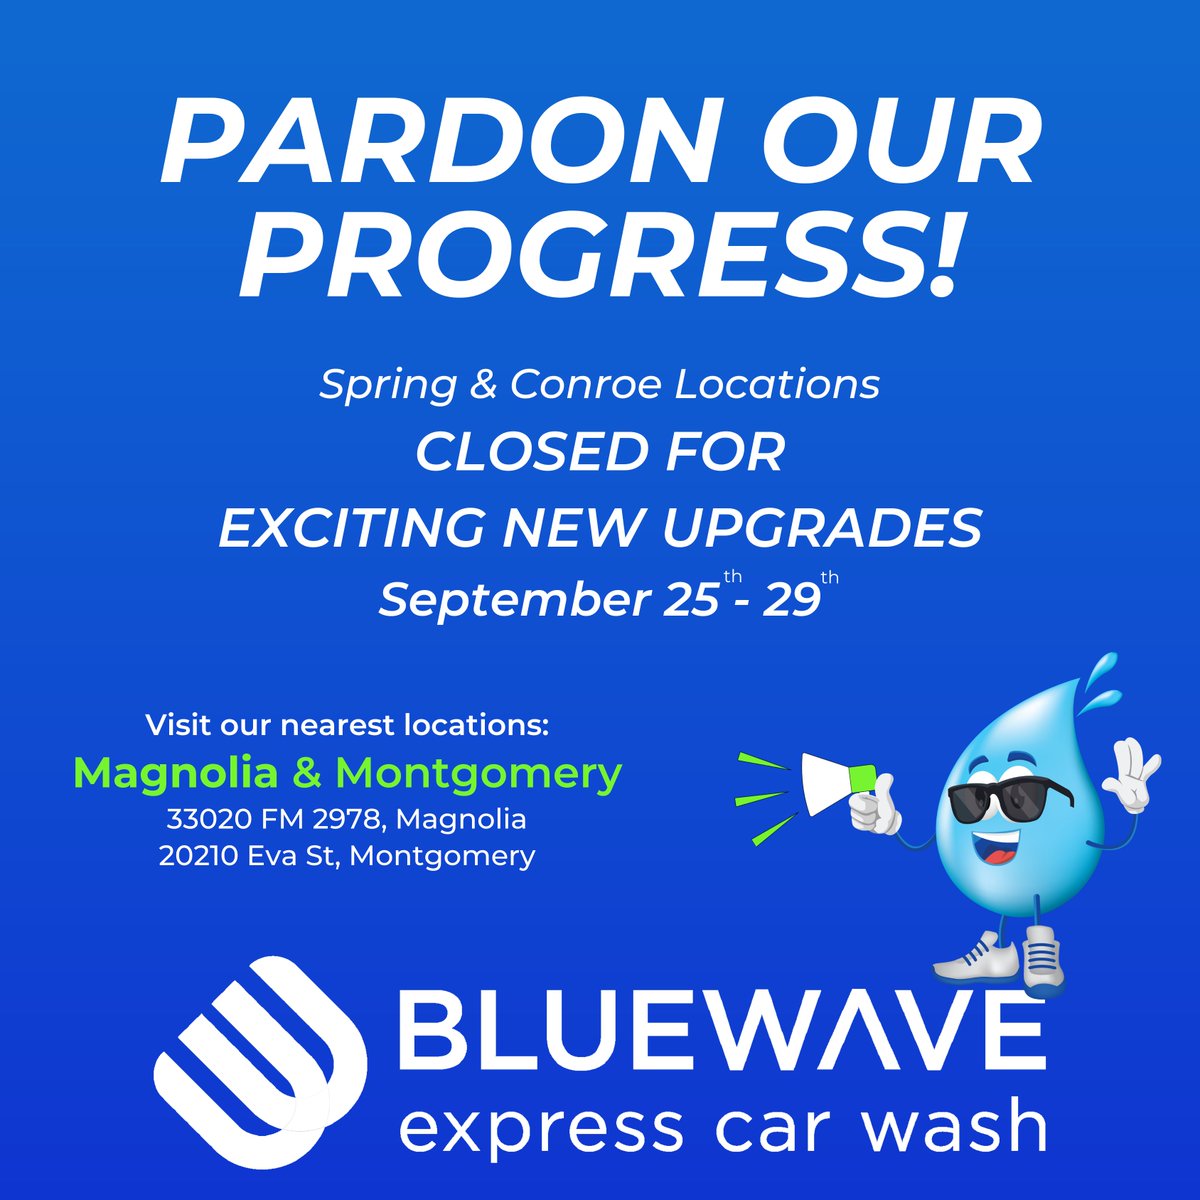 📢 Our #SpringTX and #ConroeTX locations are closed this week for exciting new #upgrades! We will be bringing you a better wash experience with more amenities. 🙌

Please visit one of our nearest locations to continue washing without interruptions.